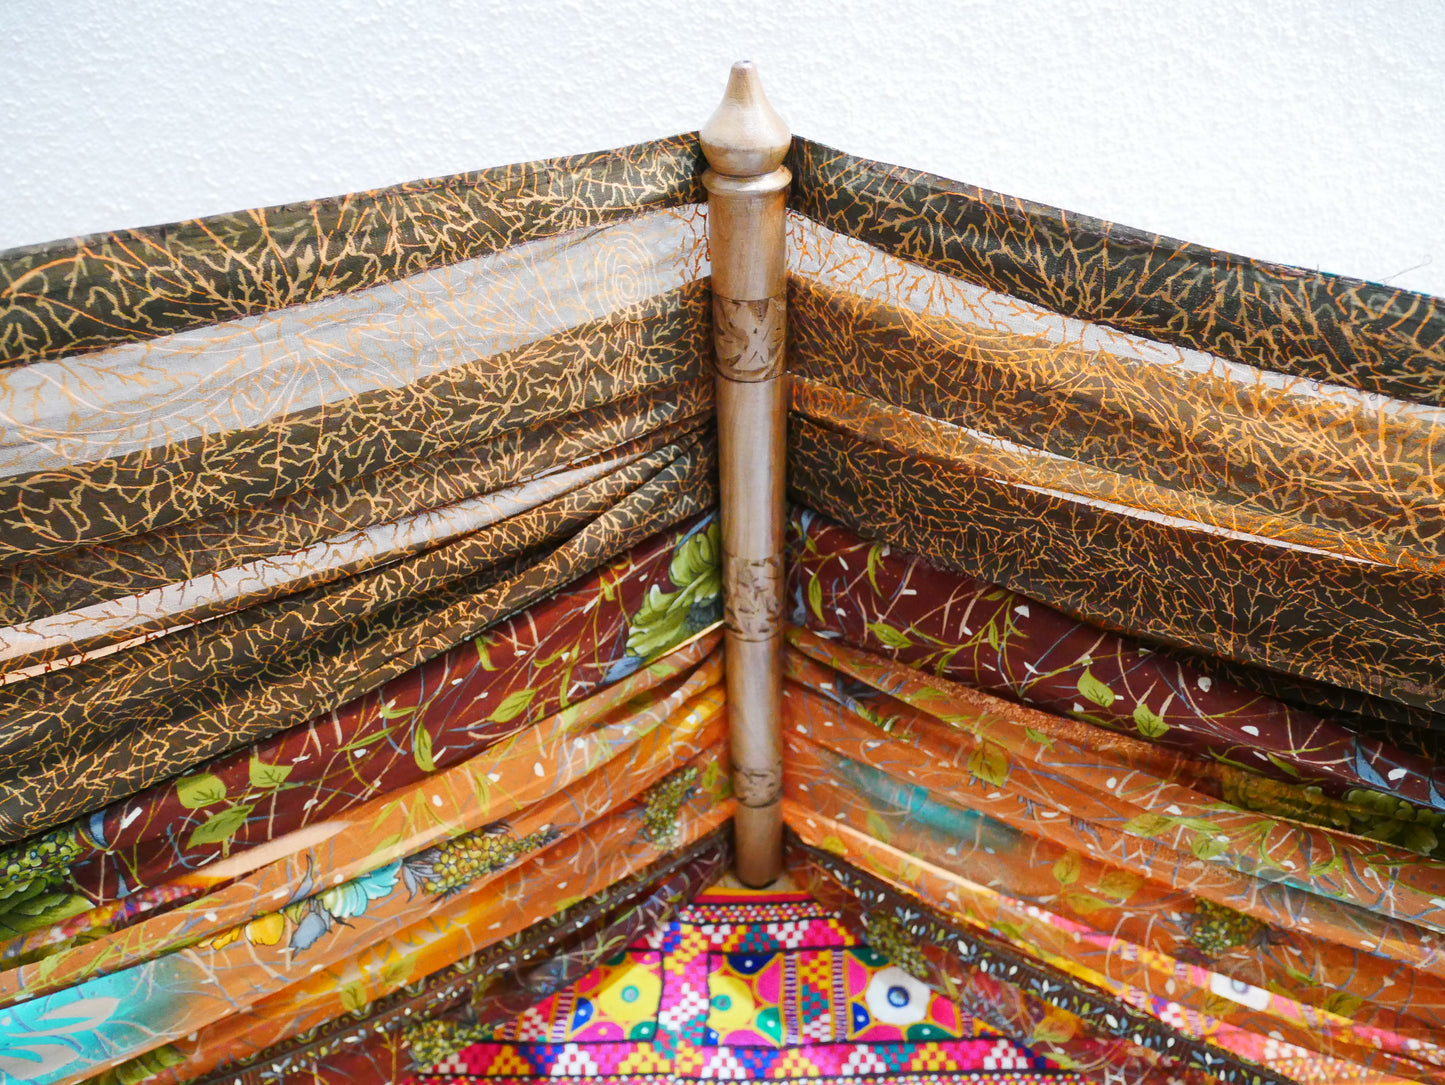 Boho bed canopy - custom made saree canopy frame with handcrafted walnut wood rods | bed curtains - meditation space